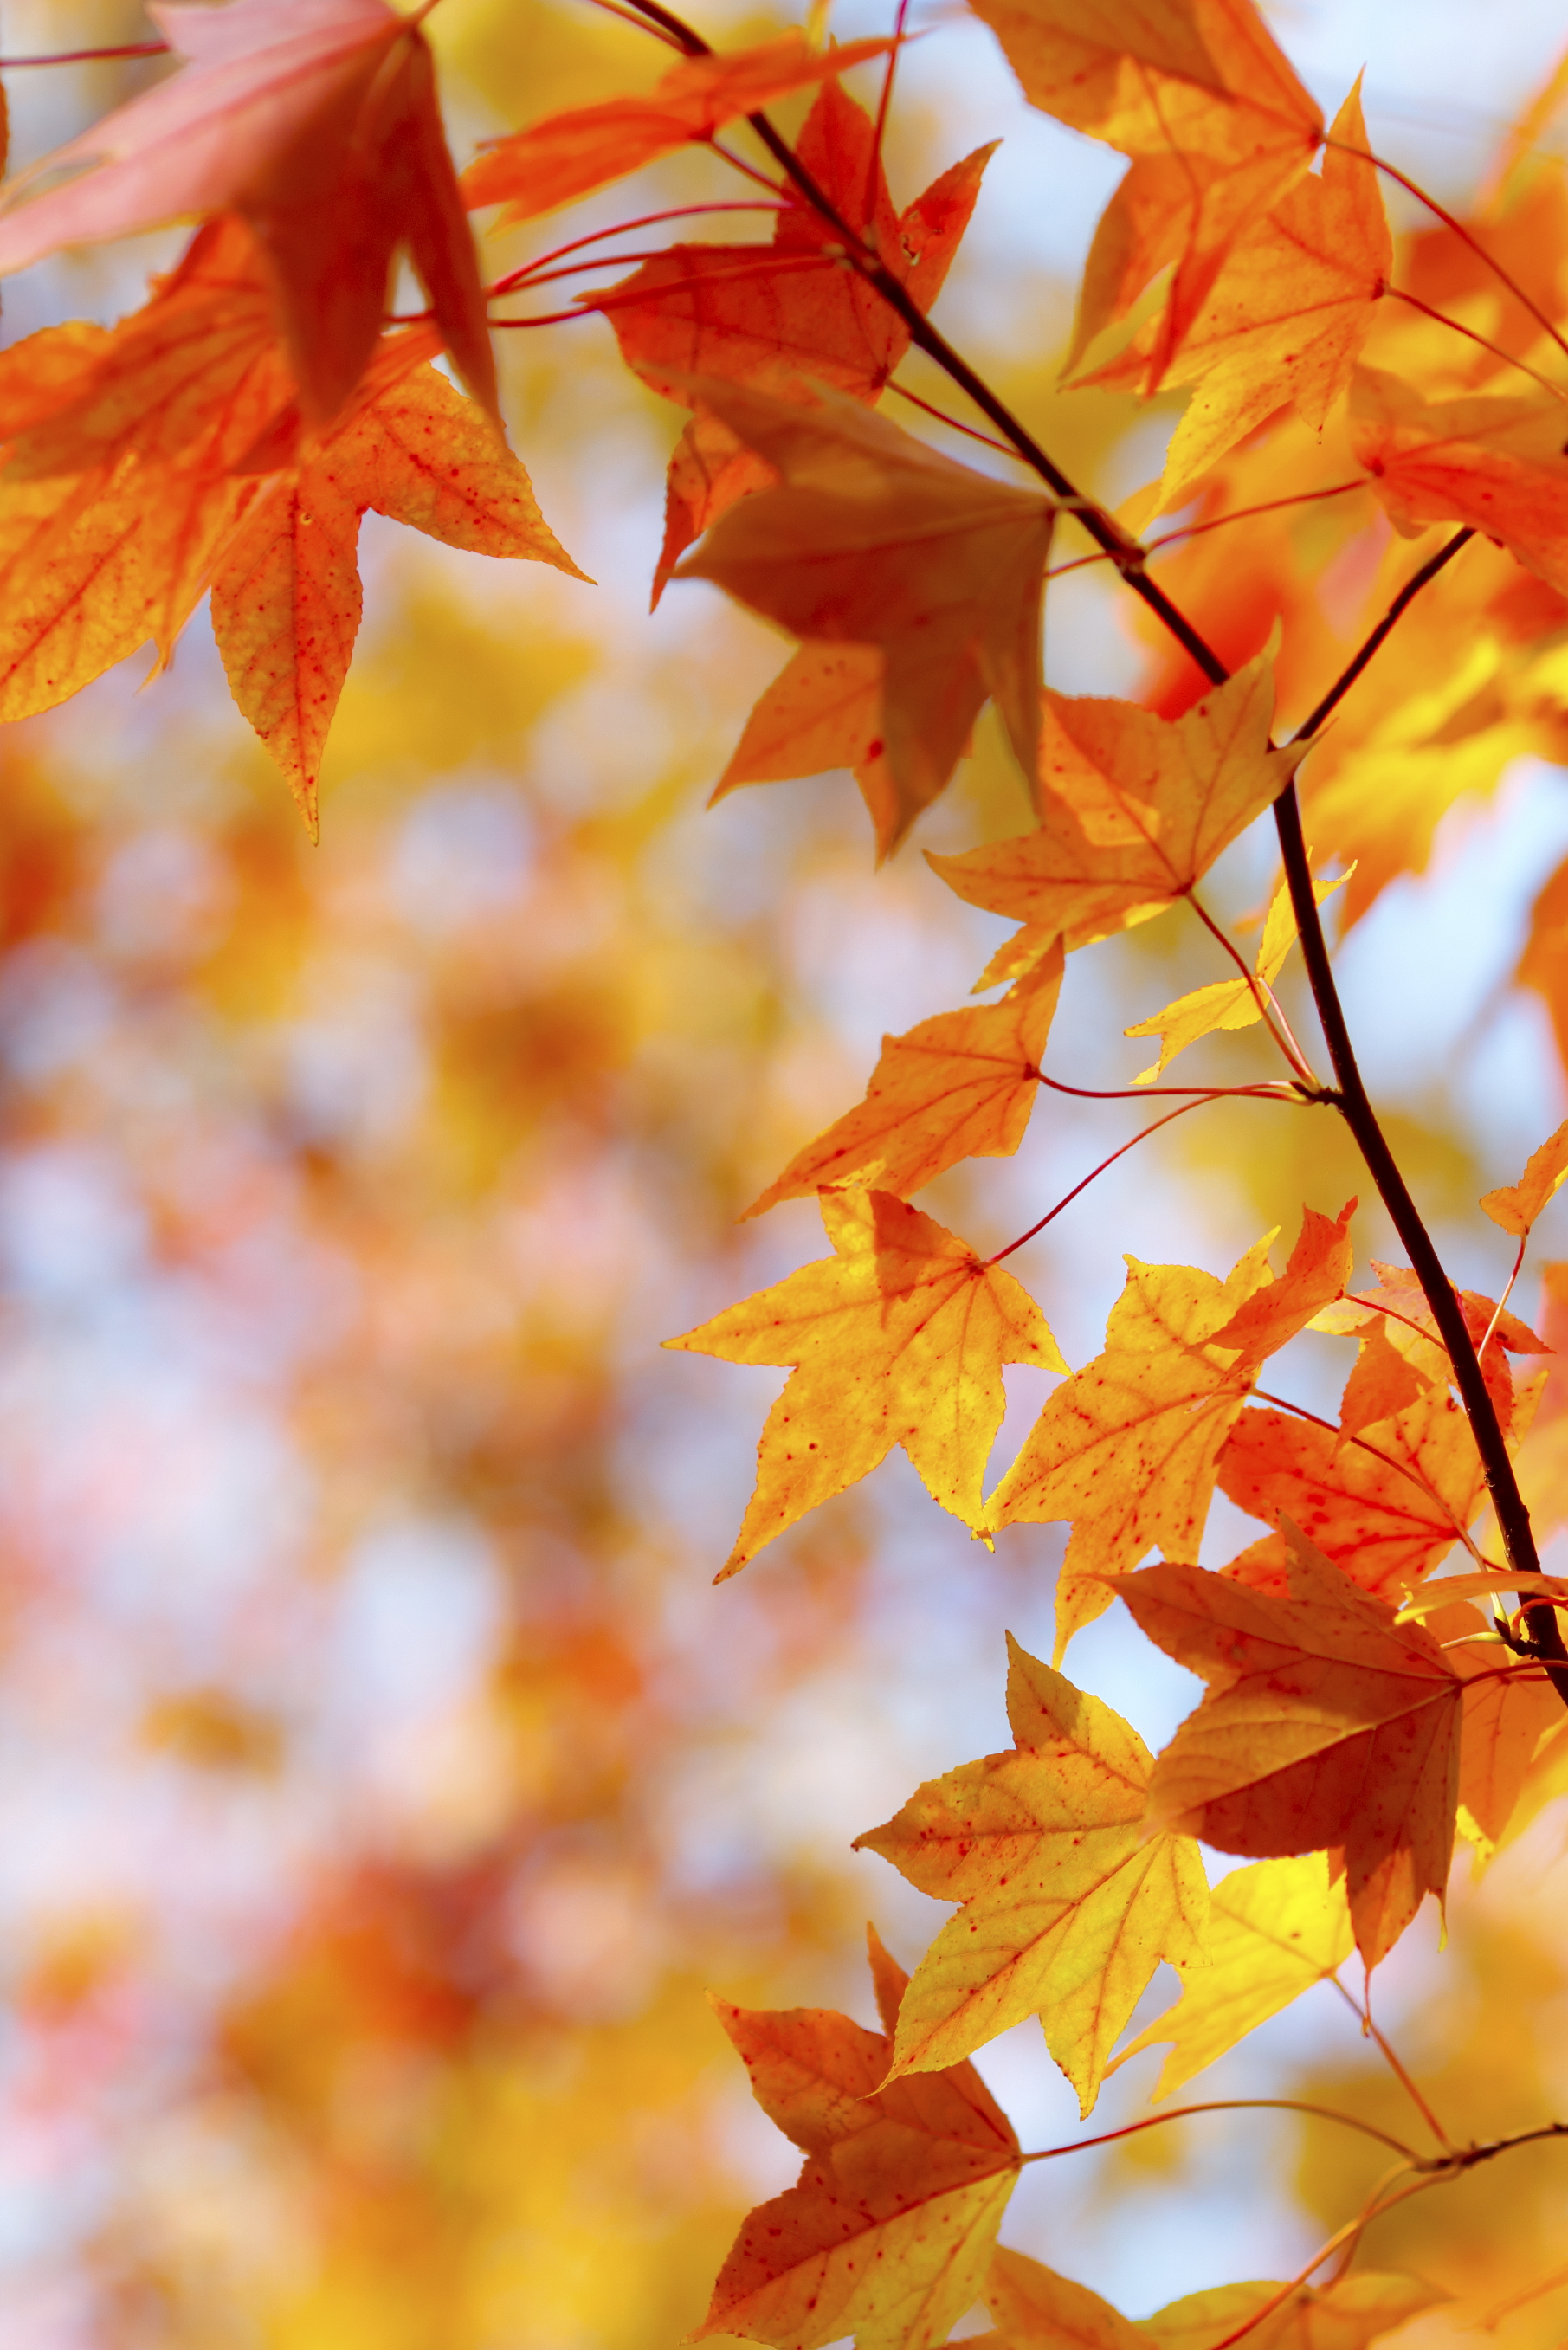 Try These 10 Fun DIY Projects With Leaves